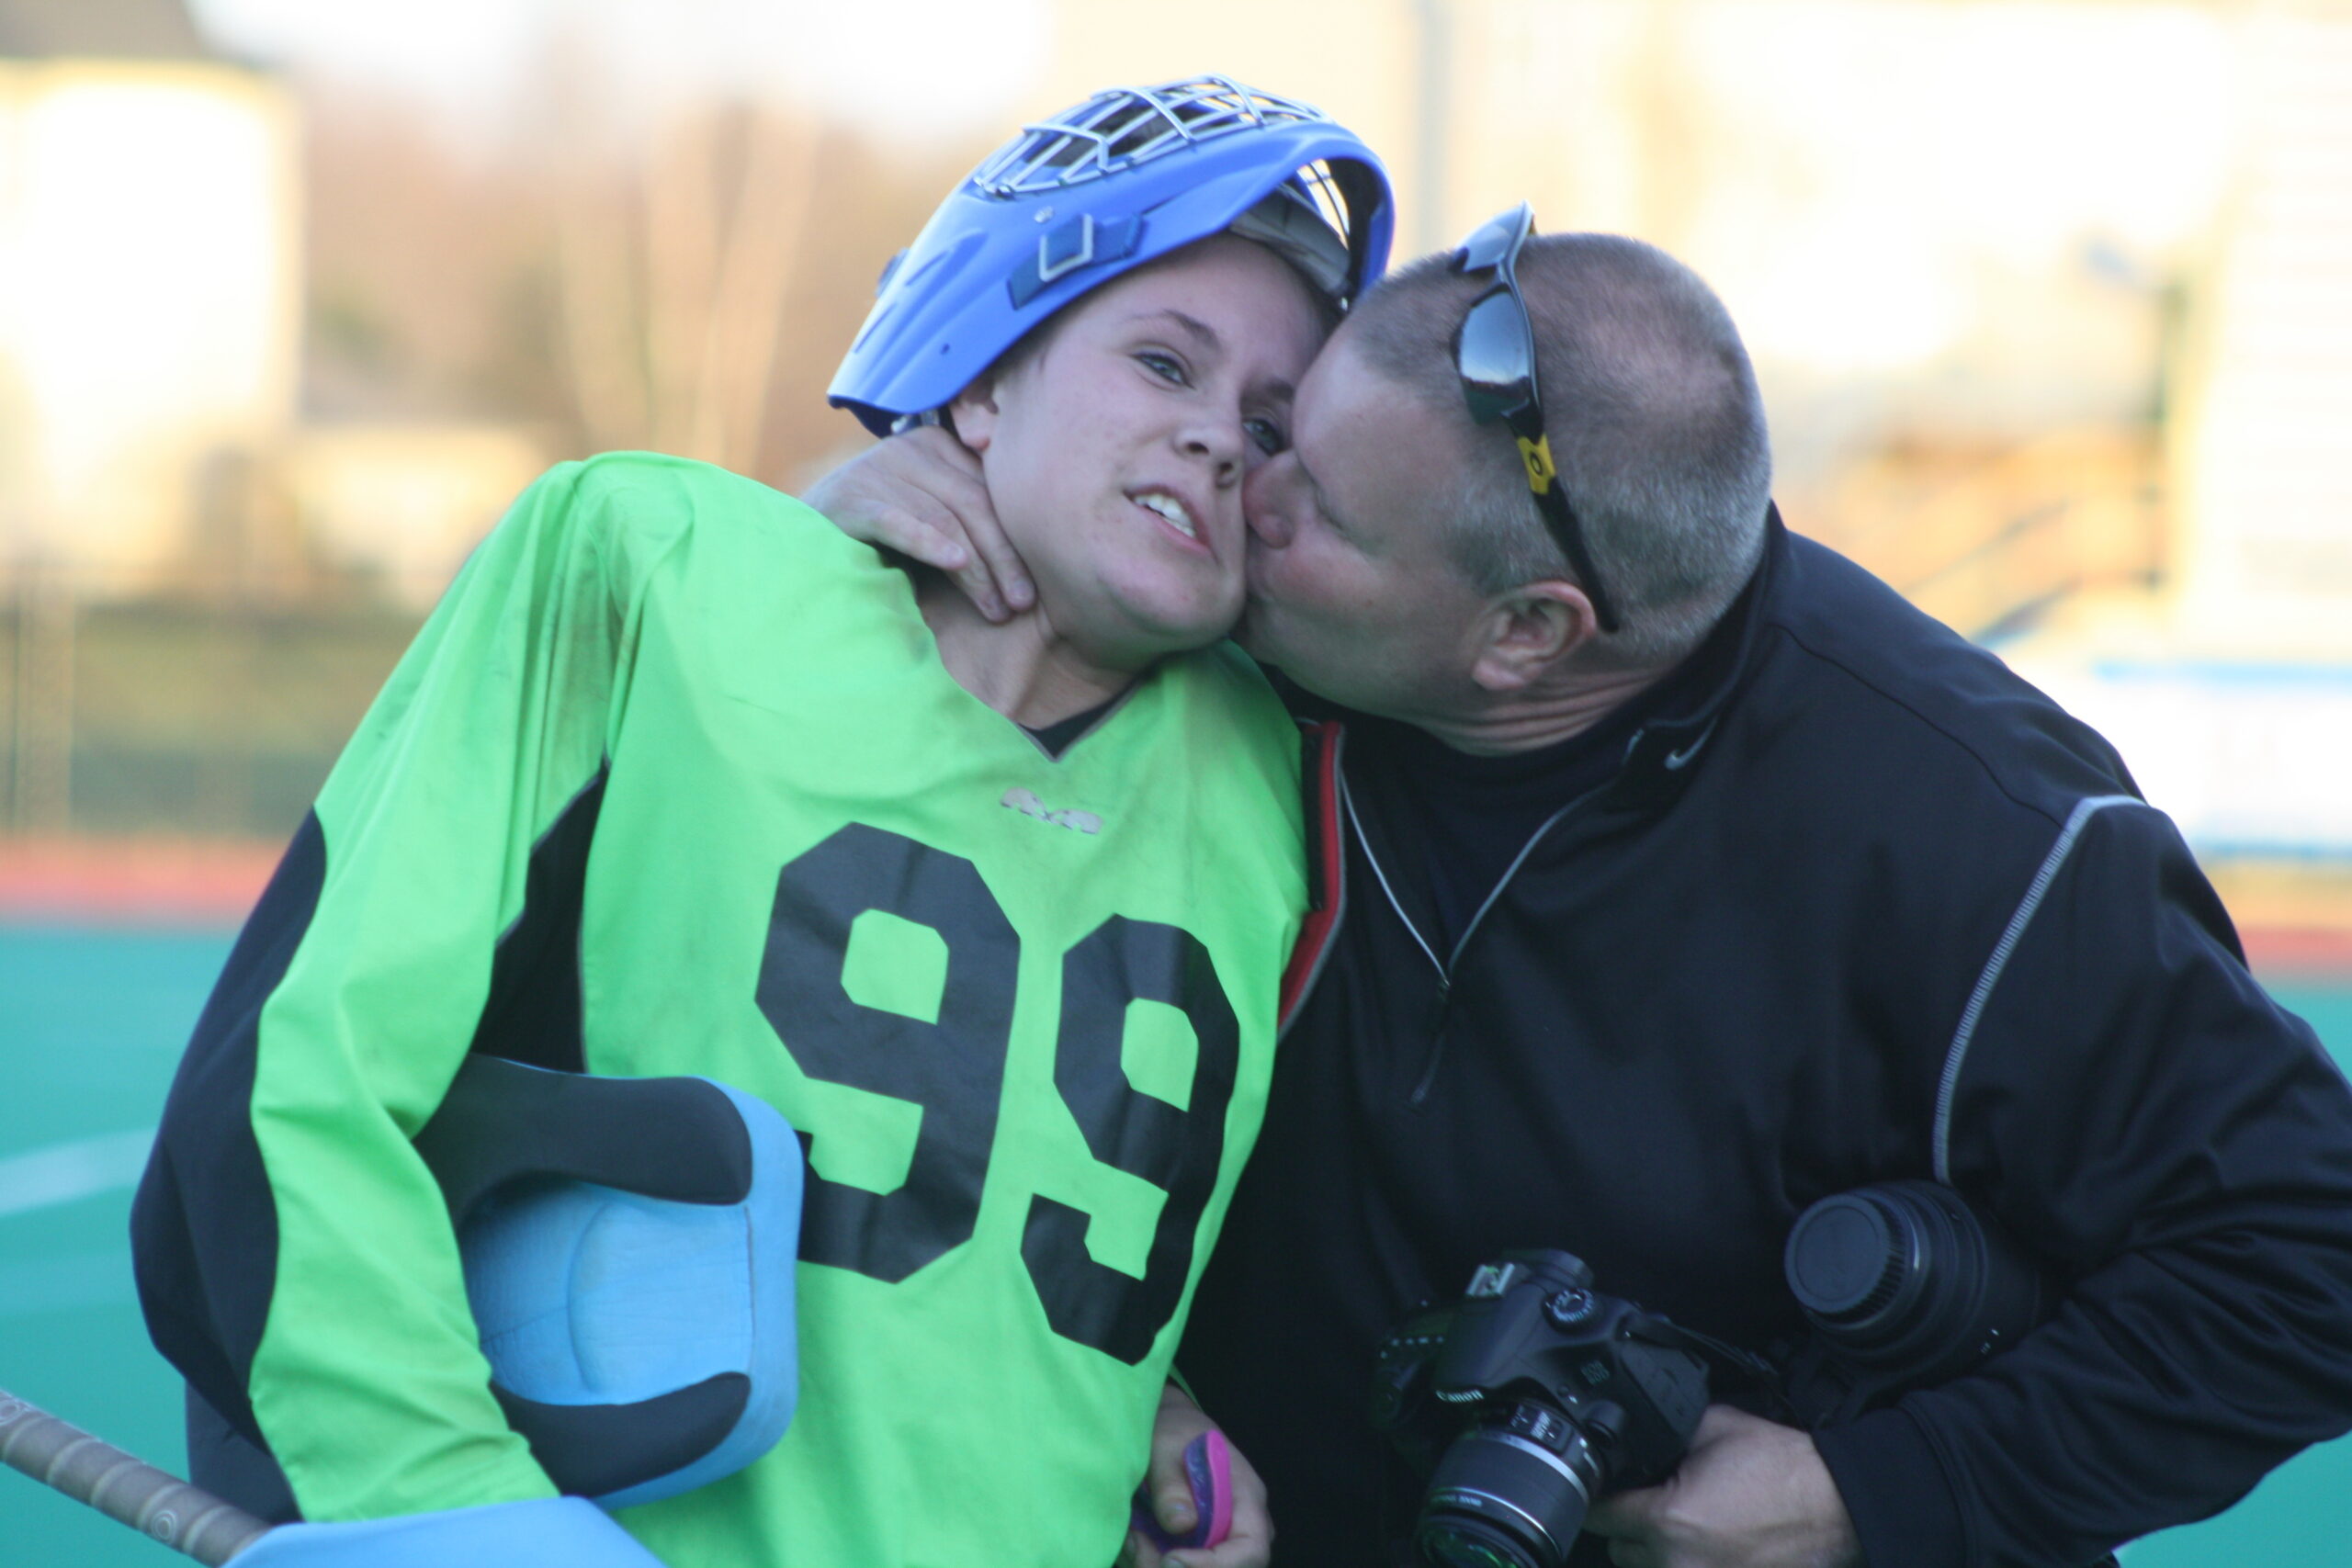 Former Pierson goalie Sam Duchemin is congratulated by her father, Kevin Duchemin, after Pierson's state championship win in 2013. EXPRESS ARCHIVES